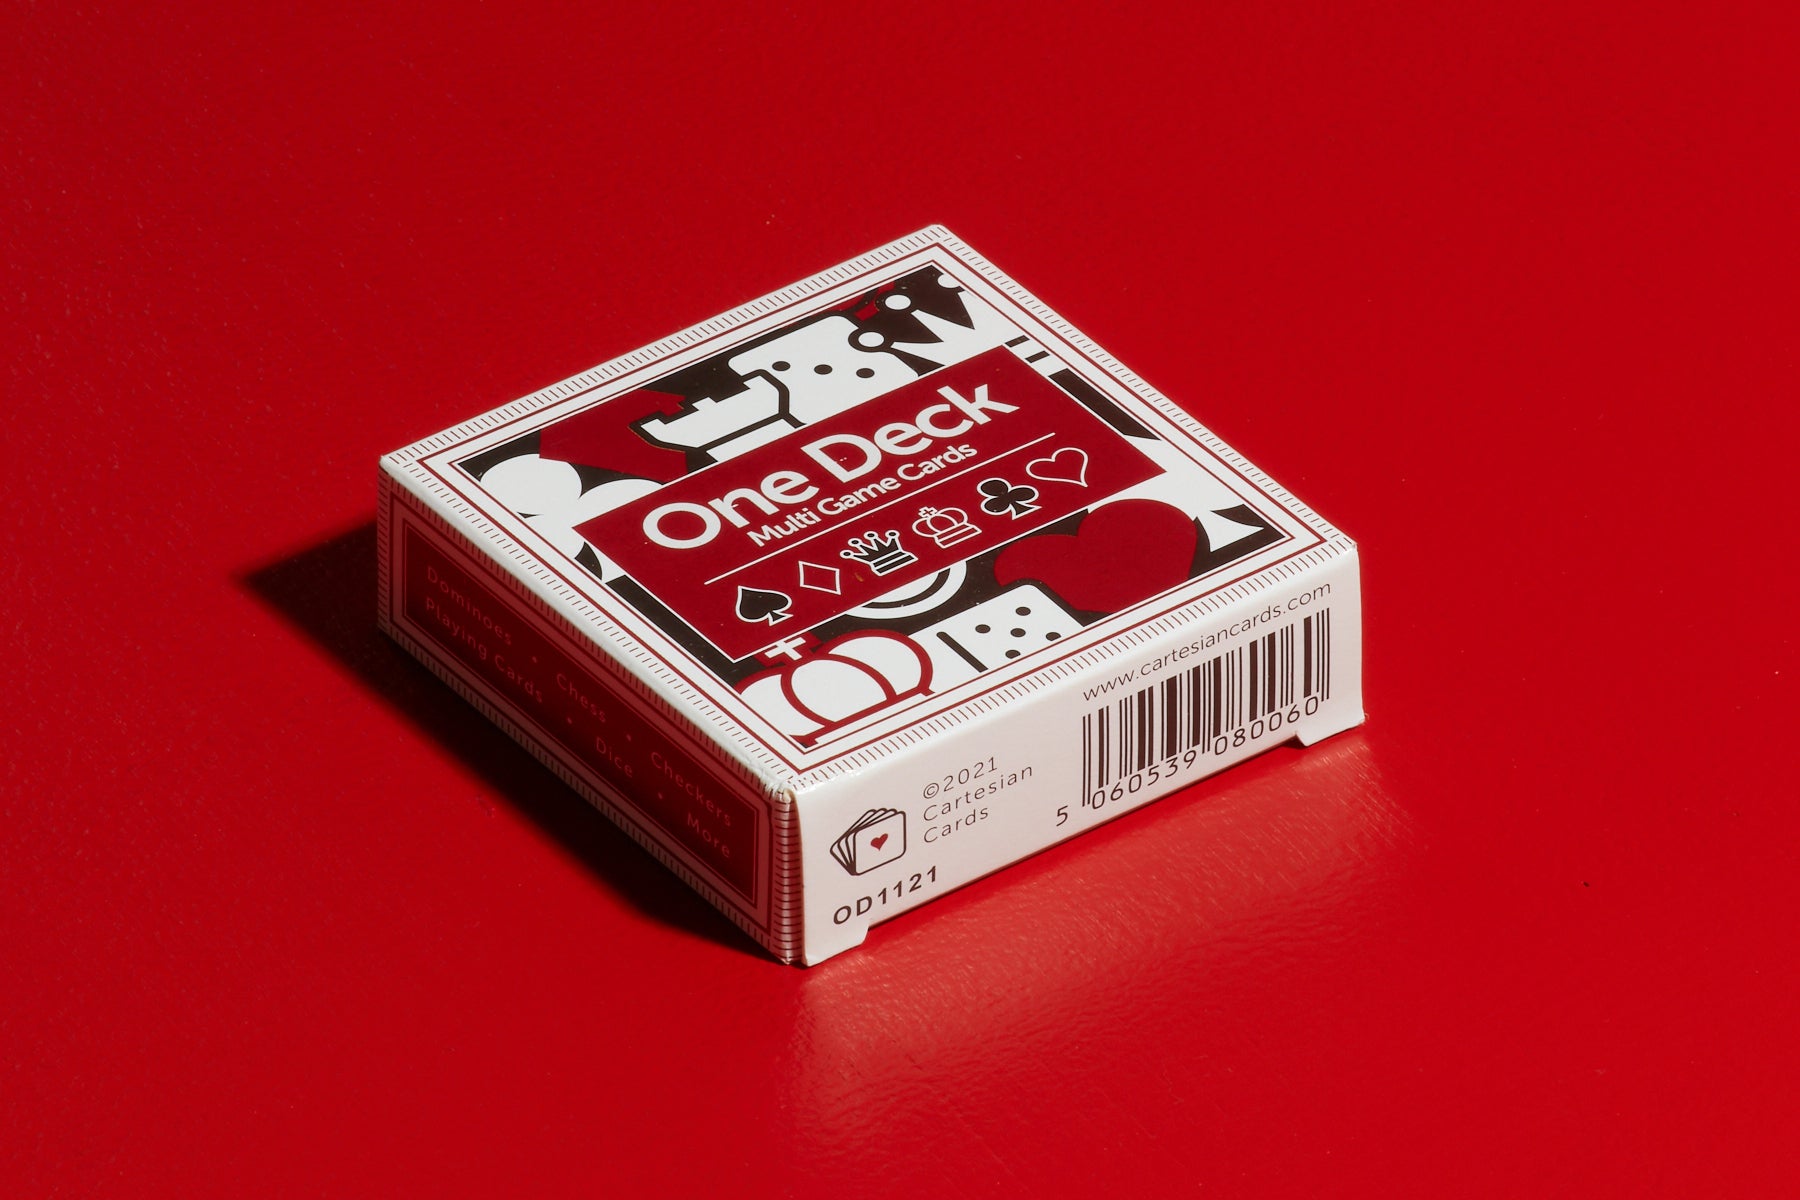 A deck of One Deck Game Cards playing cards by Cartesian Cards